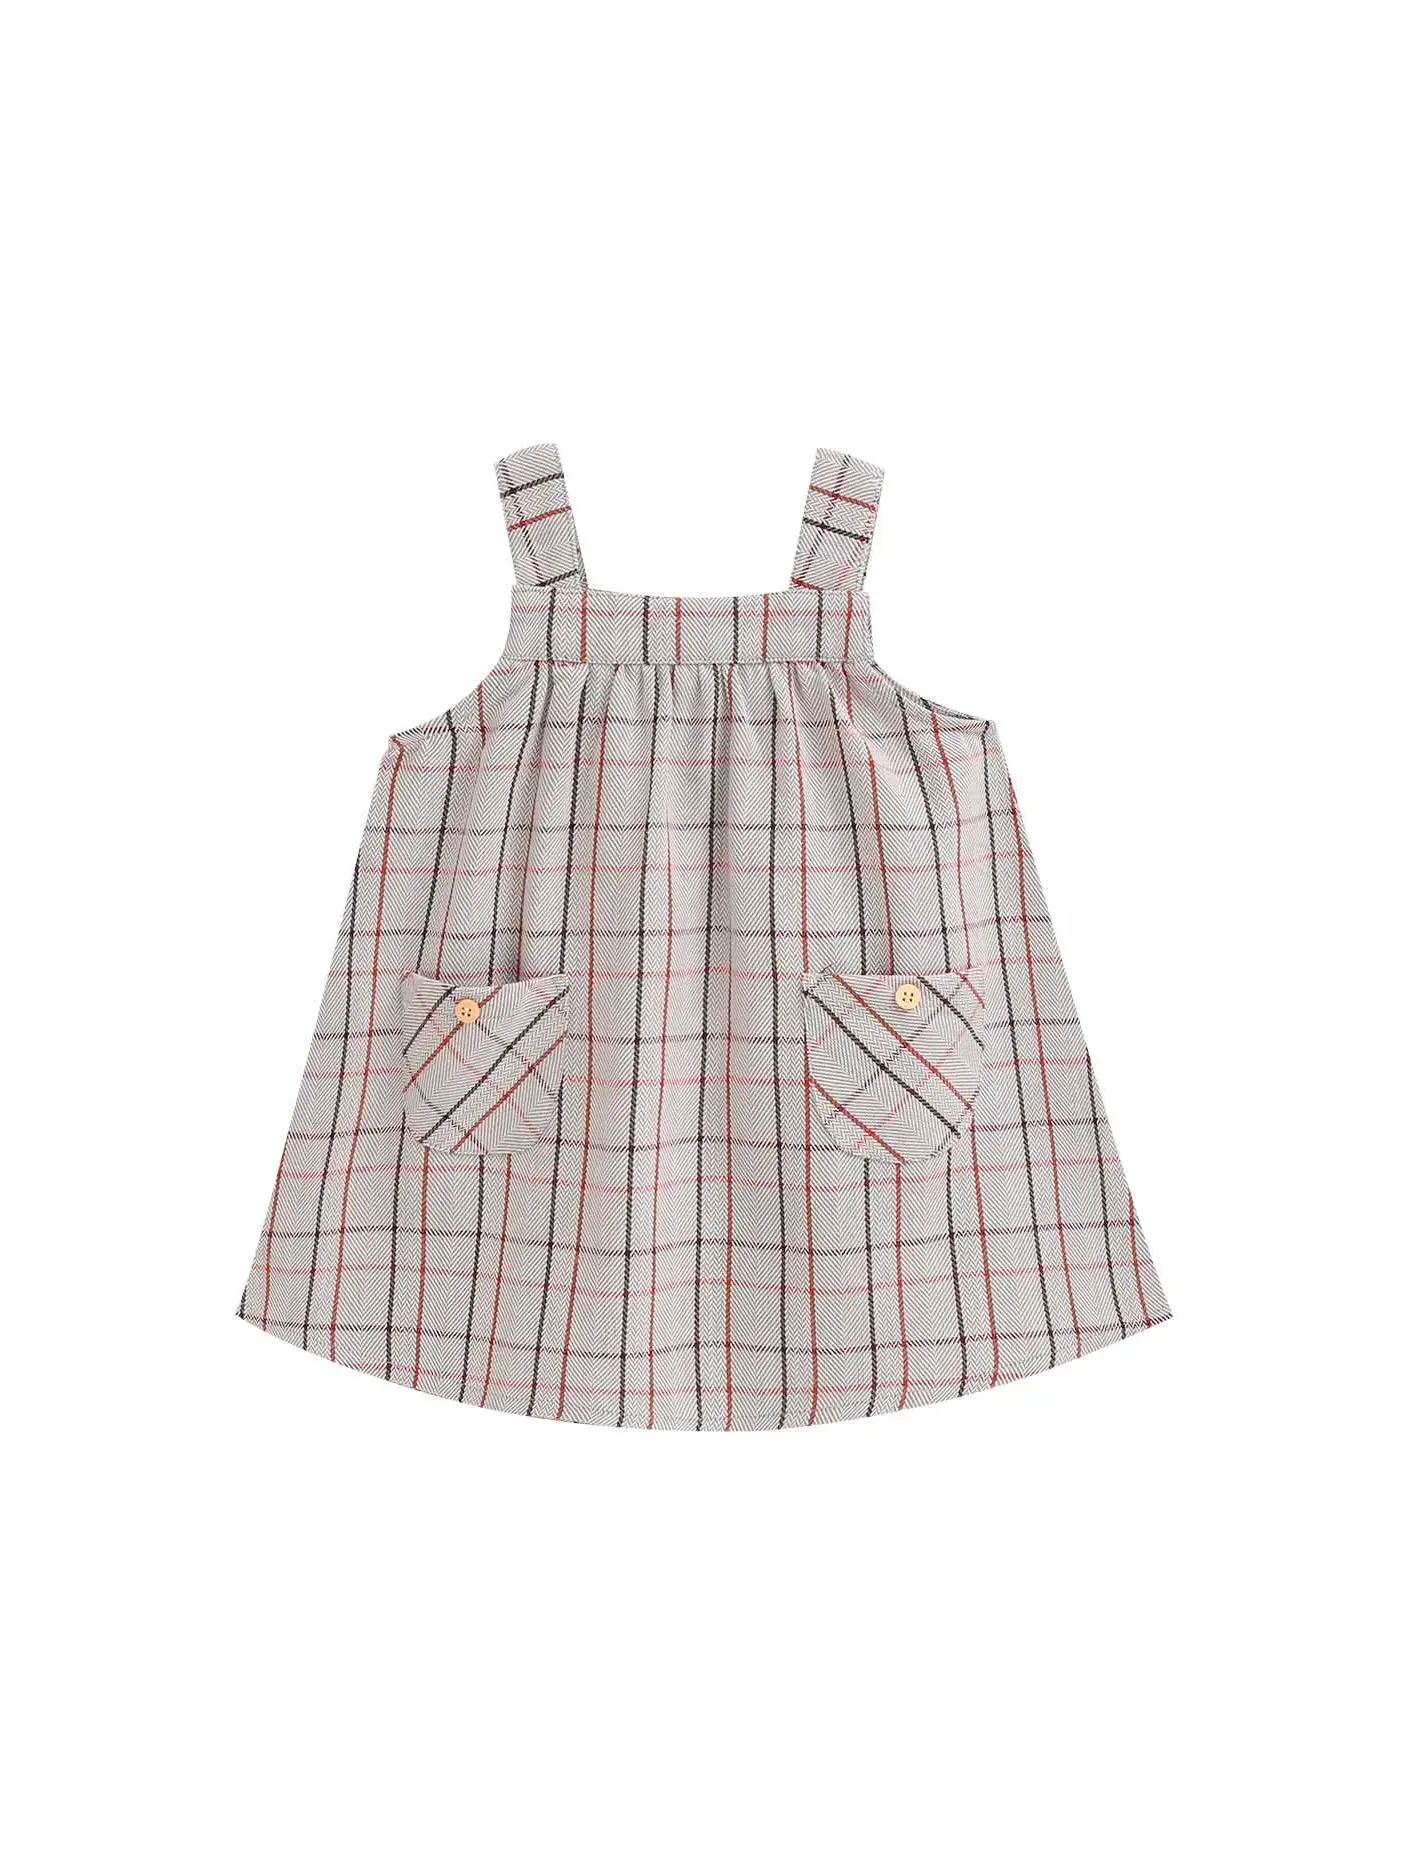 Pichi Baby Girl Gray with Red, Maroon and Brown Checkered